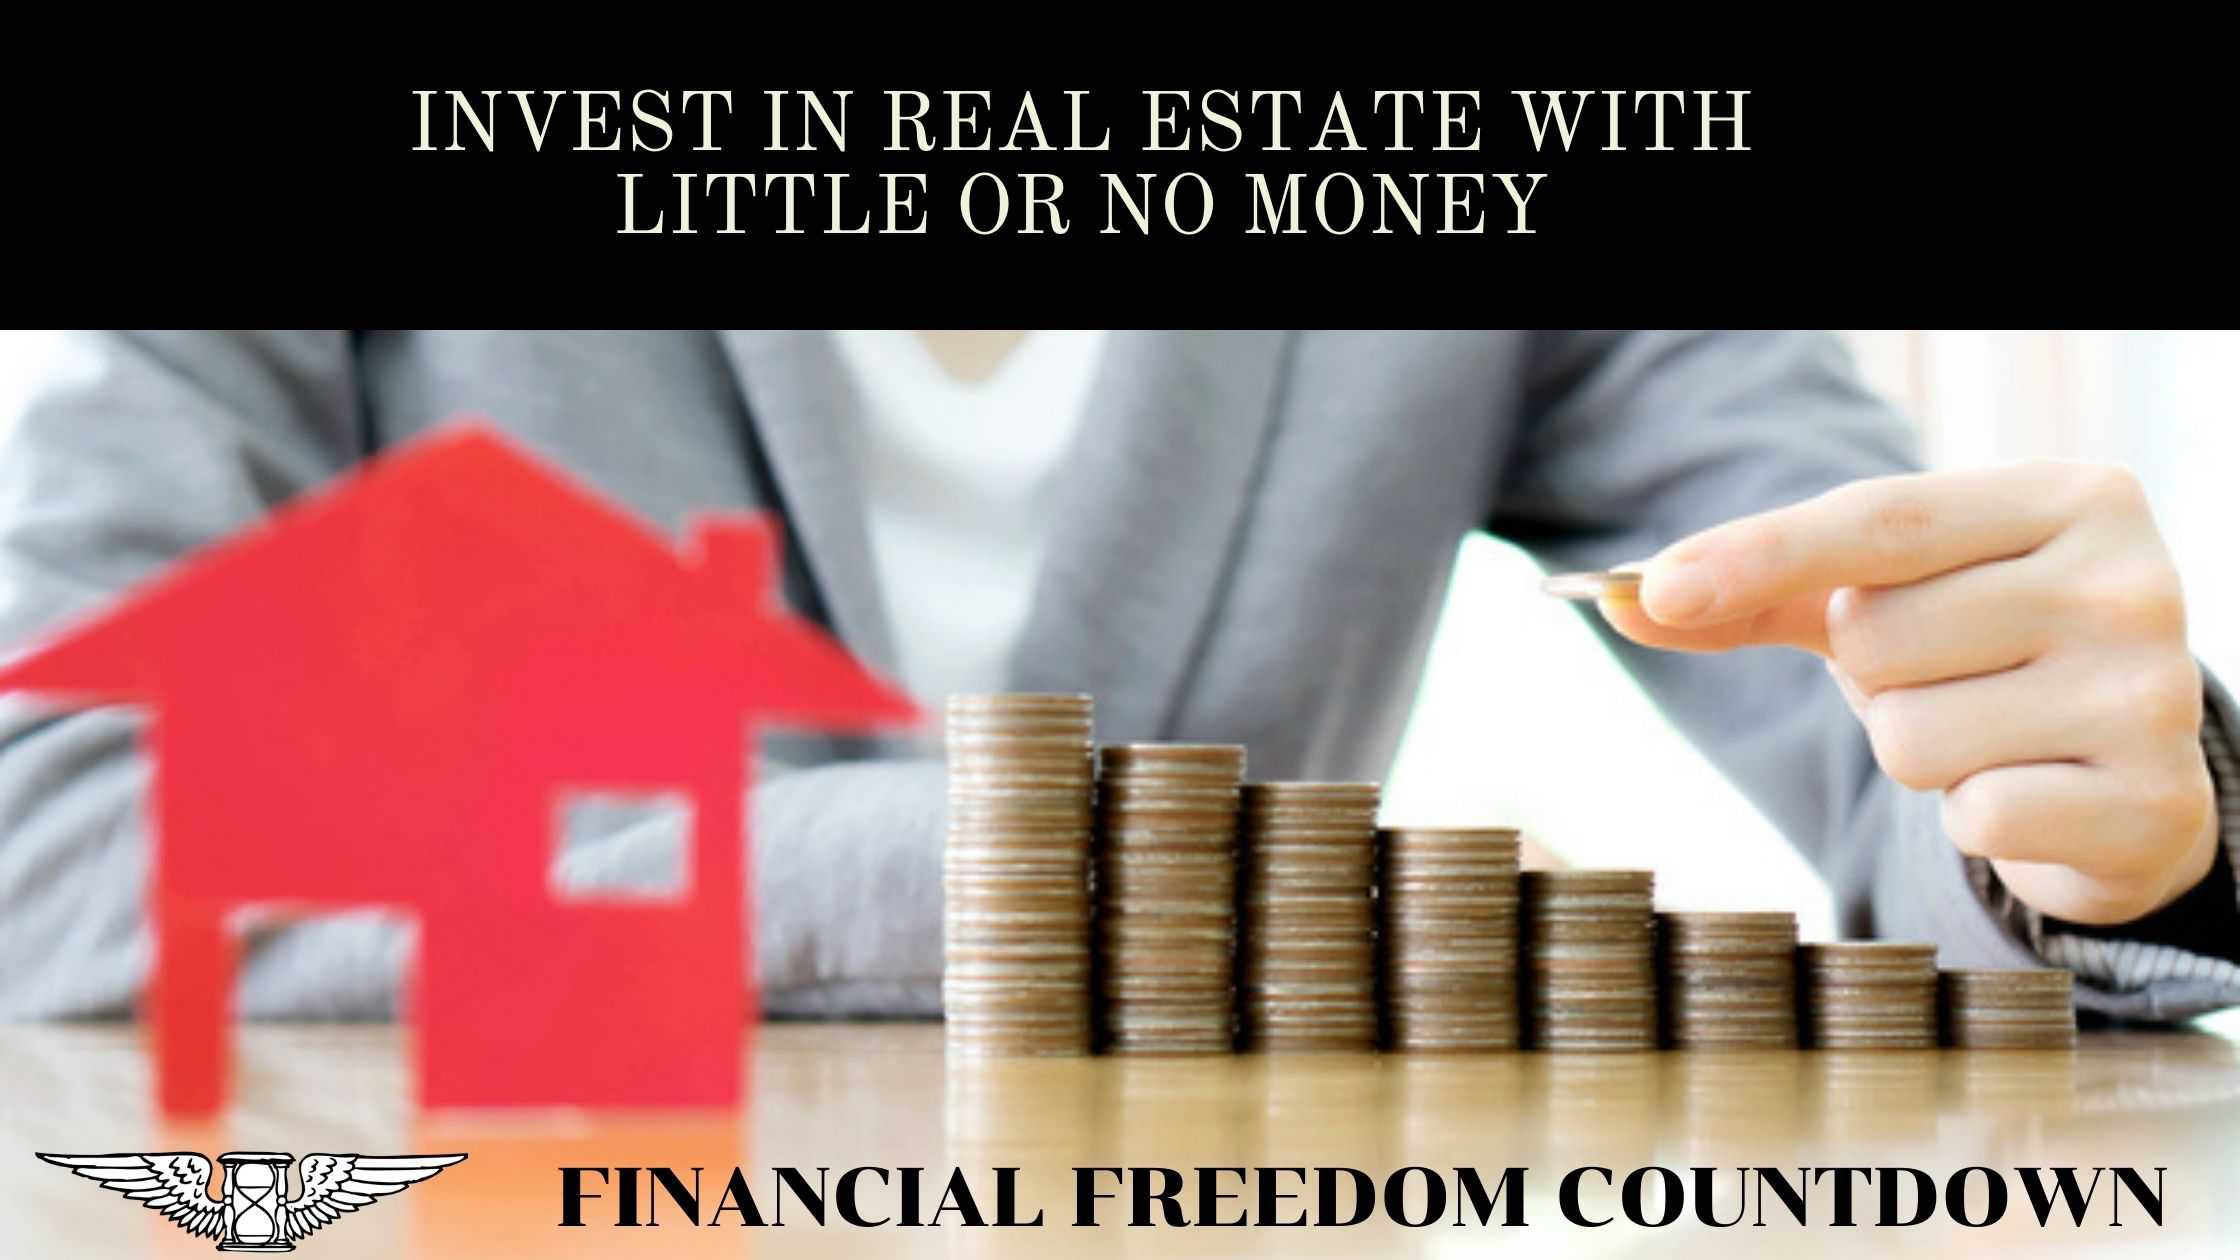 How To Invest In Real Estate With Little Or No Money?